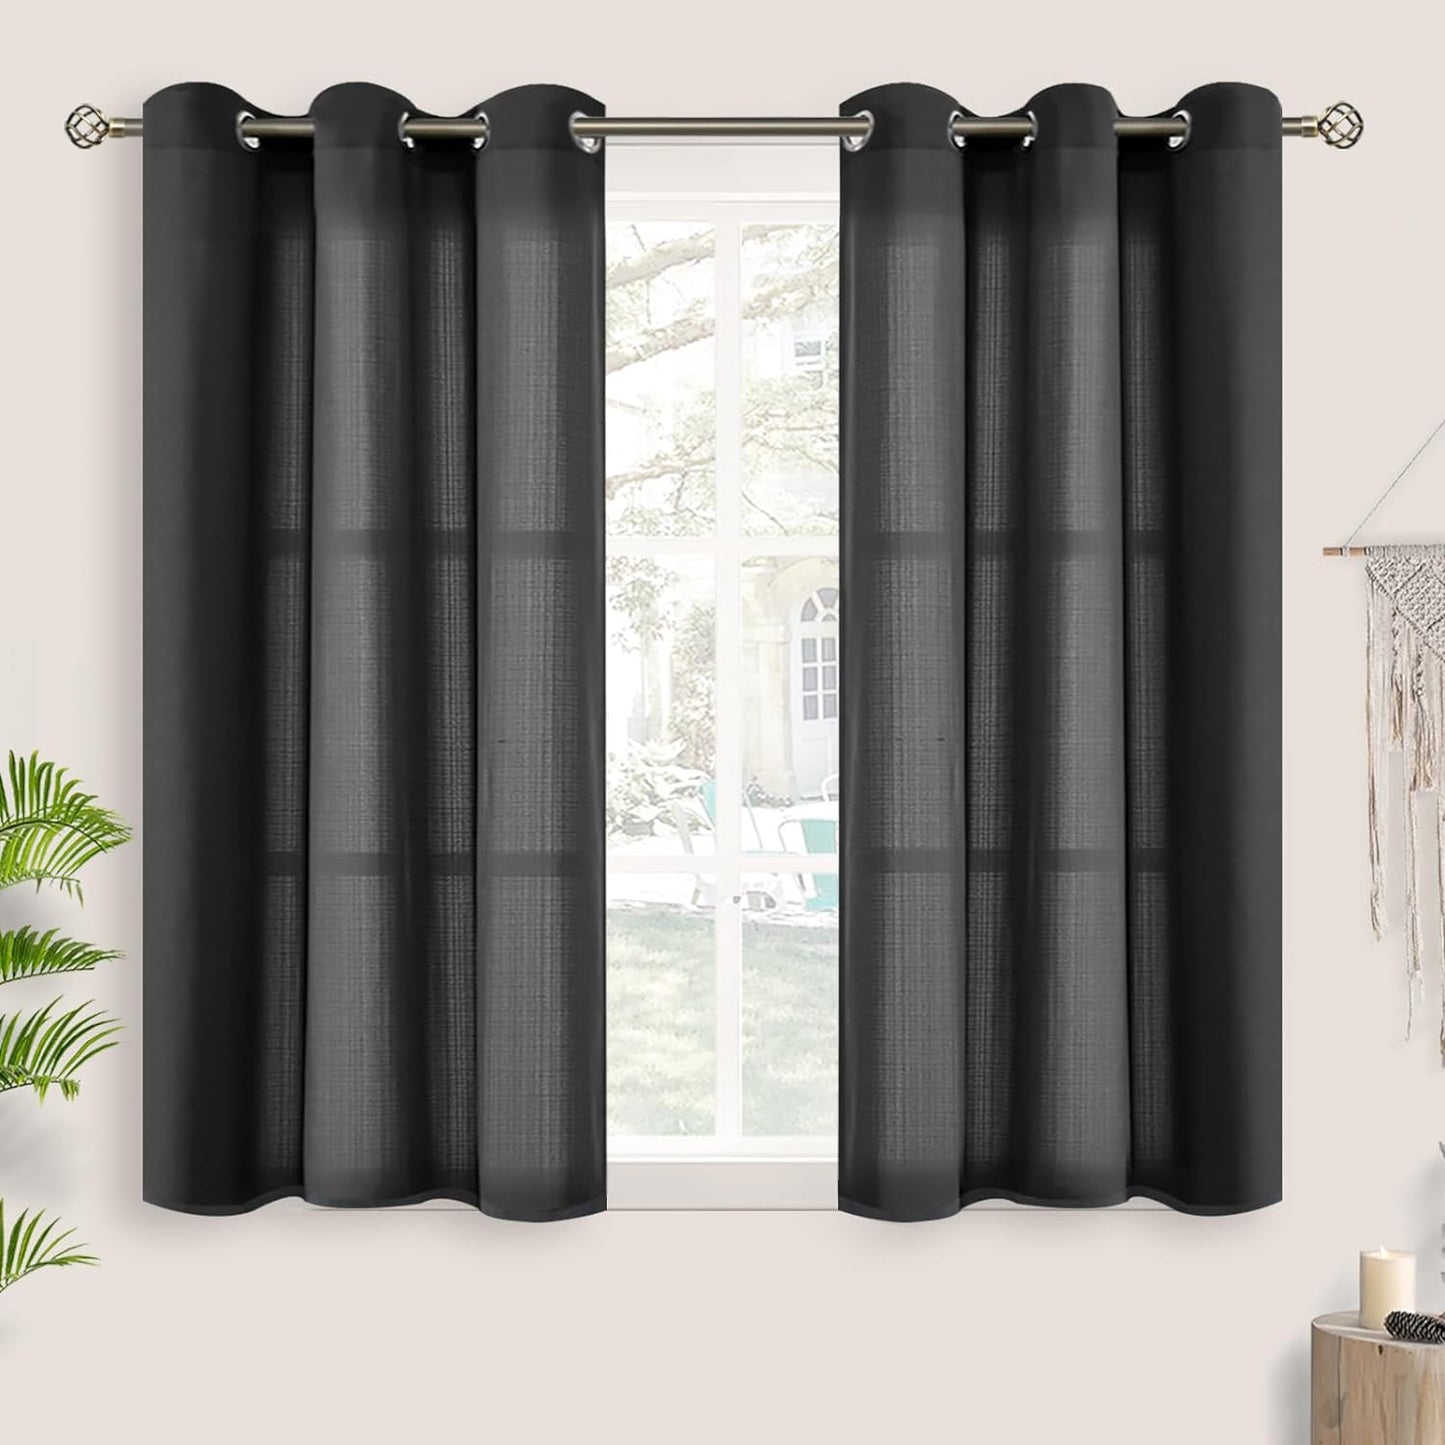 Bgment Natural Linen Look Semi Sheer Curtains for Bedroom, 52 X 54 Inch White Grommet Light Filtering Casual Textured Privacy Curtains for Bay Window, 2 Panels  BGment Black 42W X 45L 